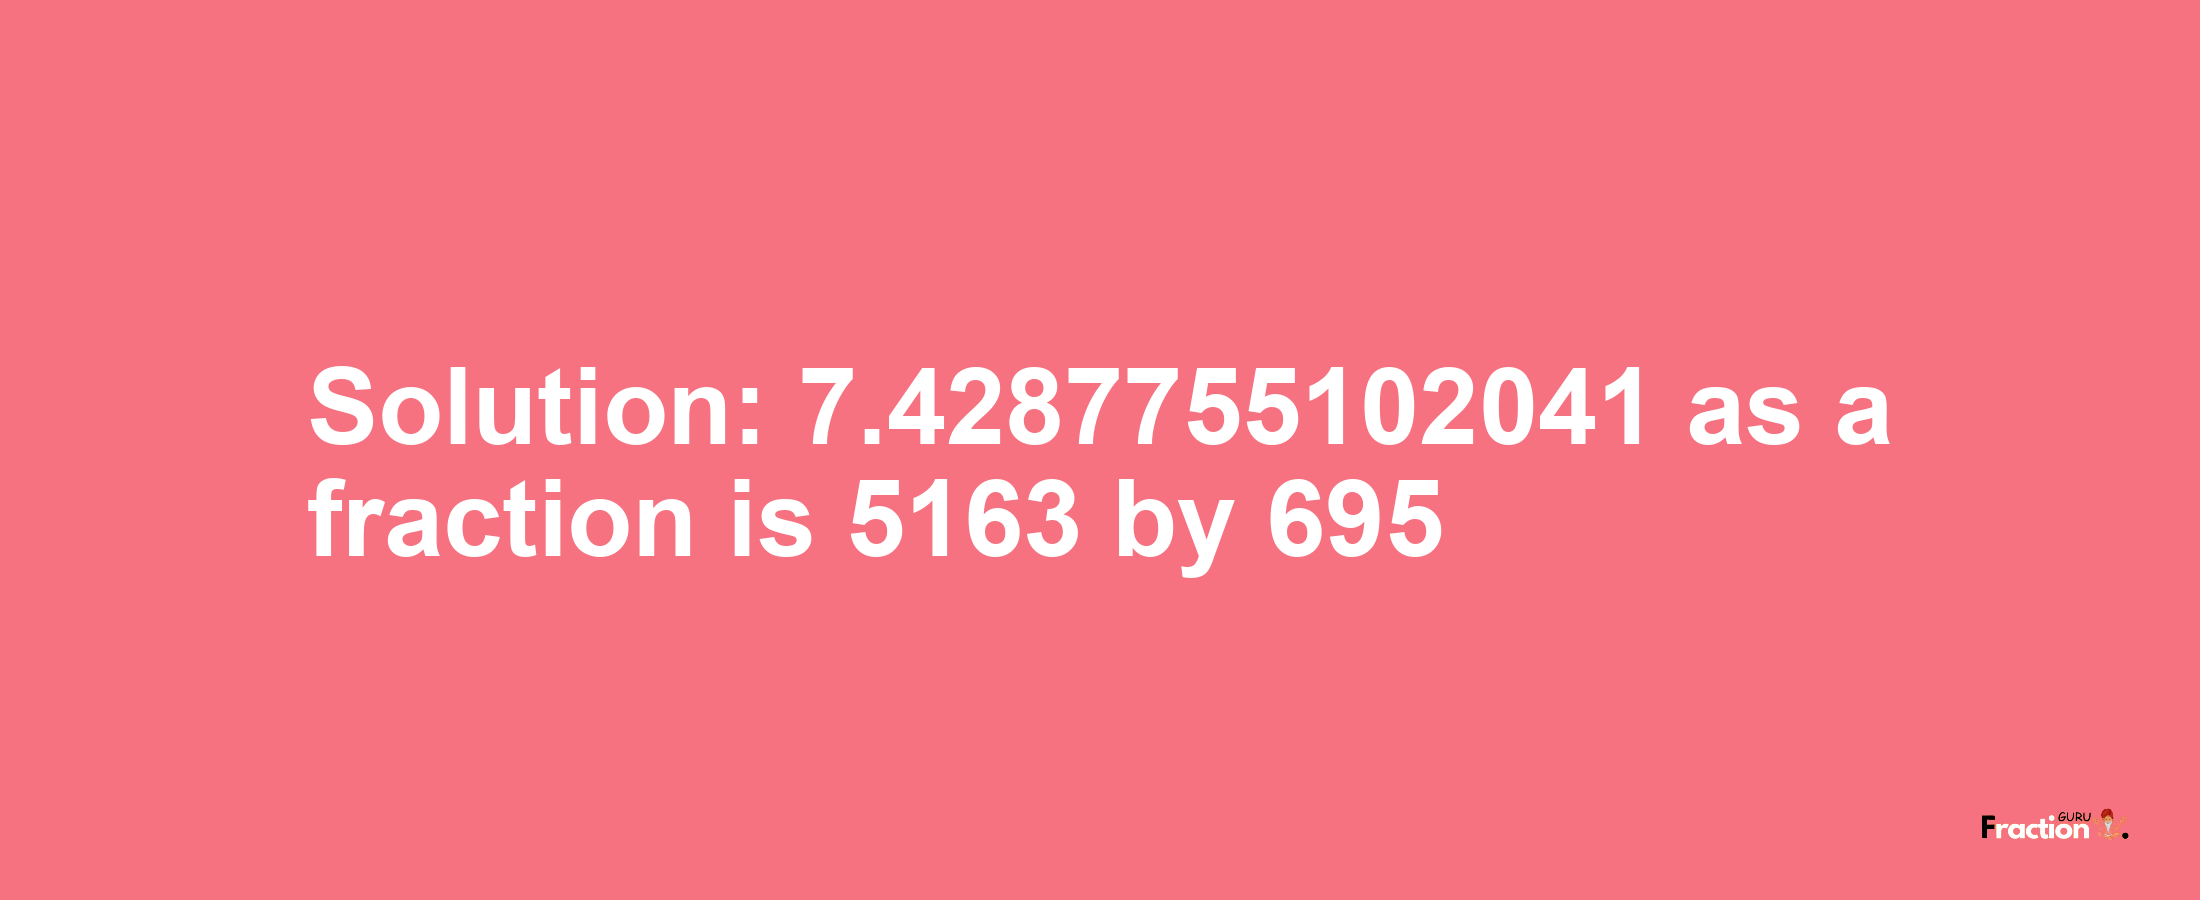 Solution:7.4287755102041 as a fraction is 5163/695